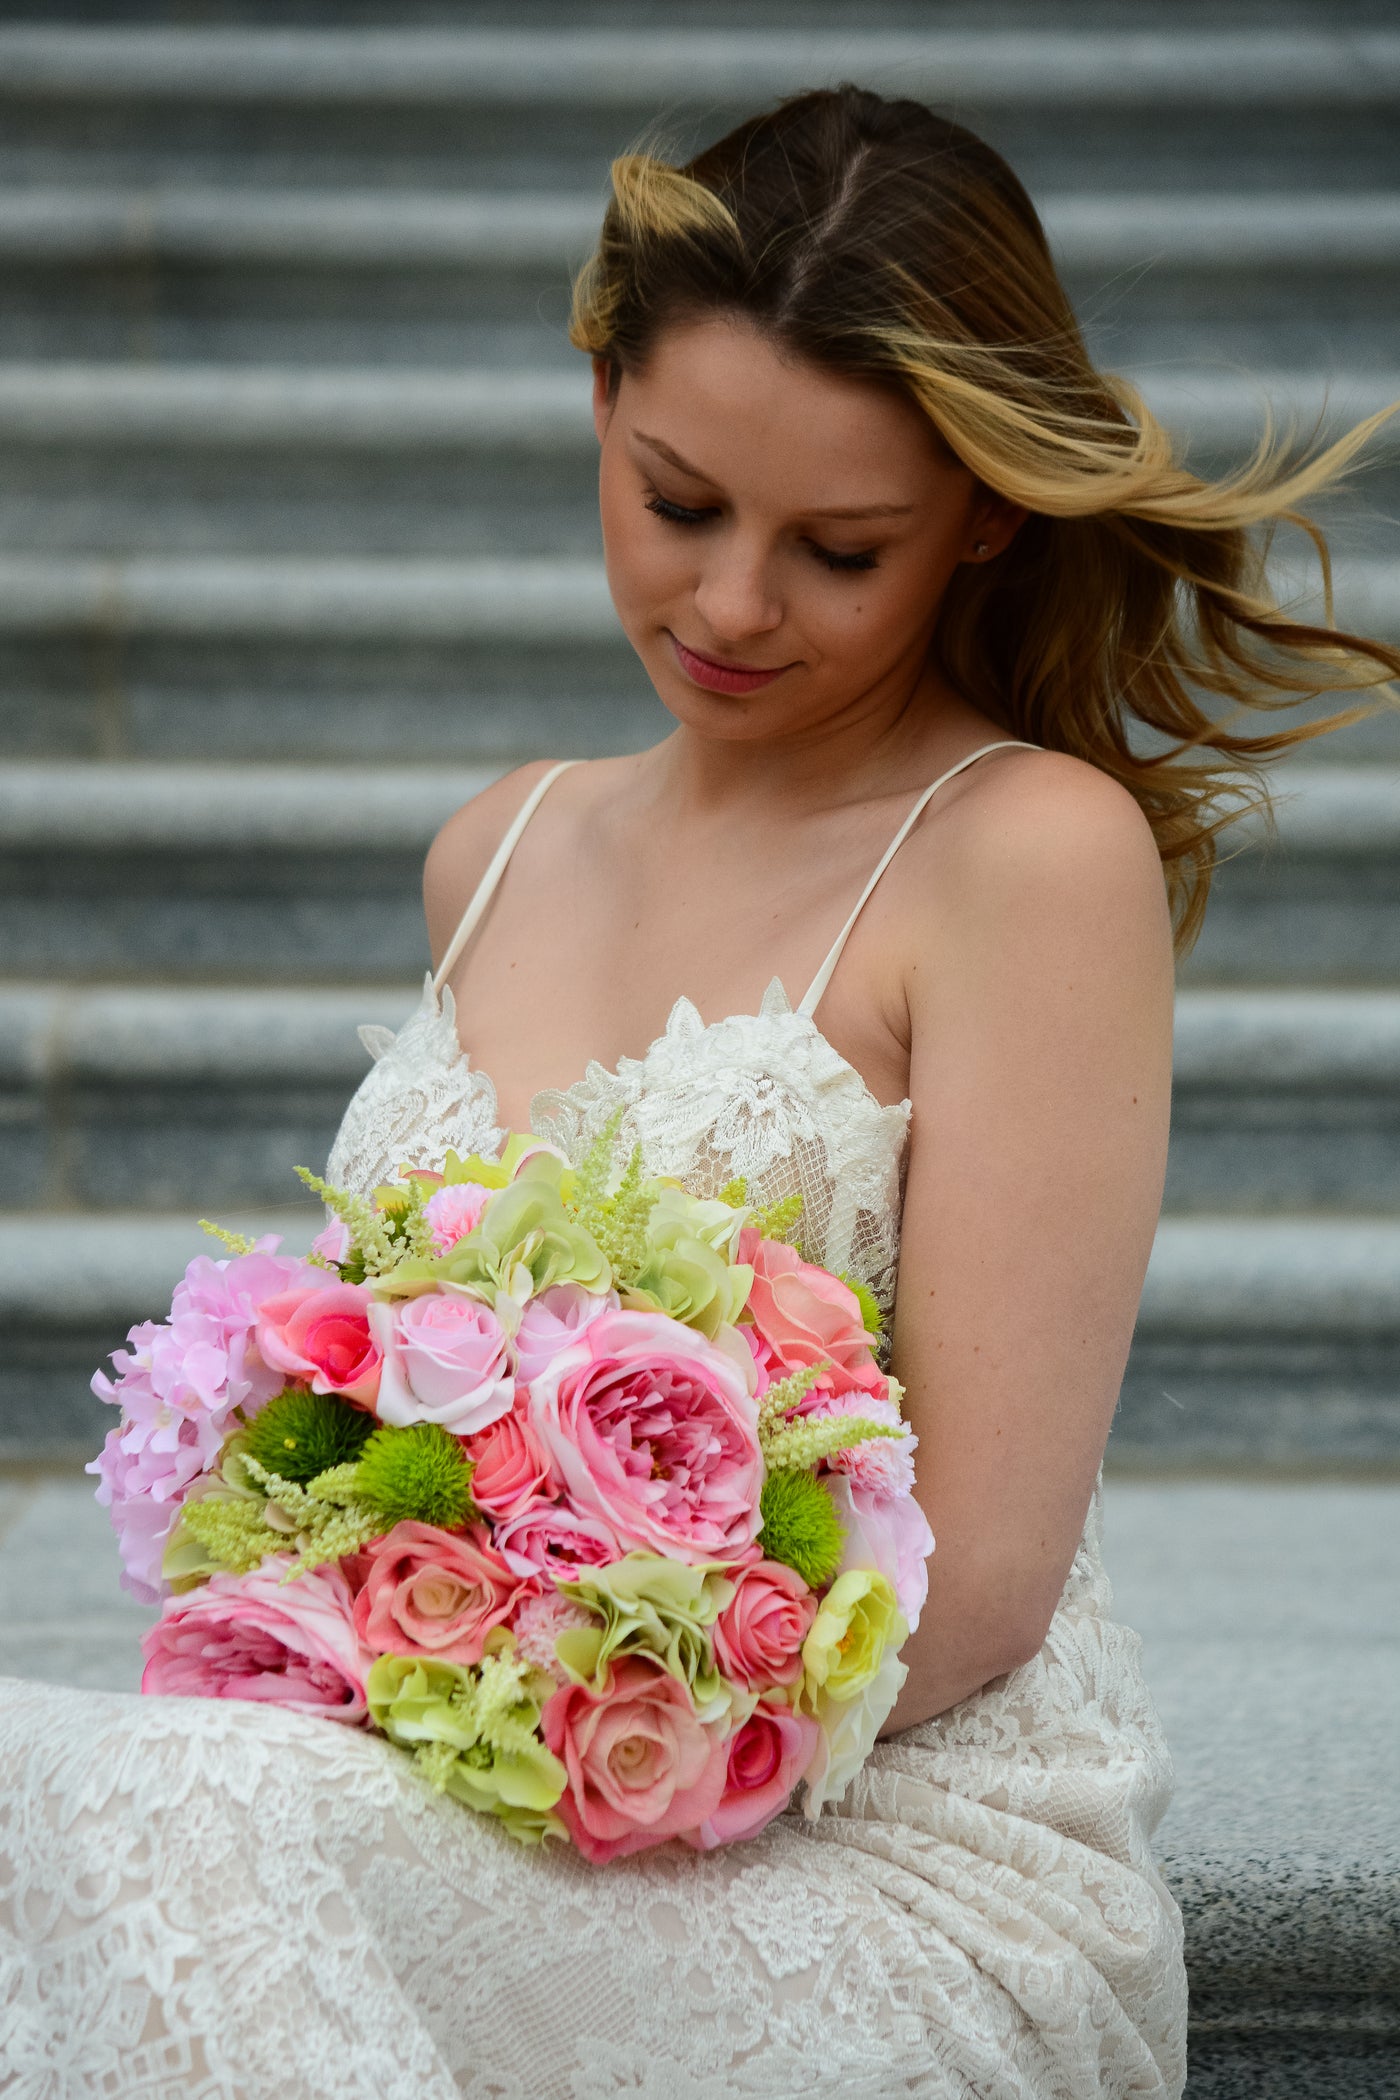 Bridal Bouquet in Cotton Candy